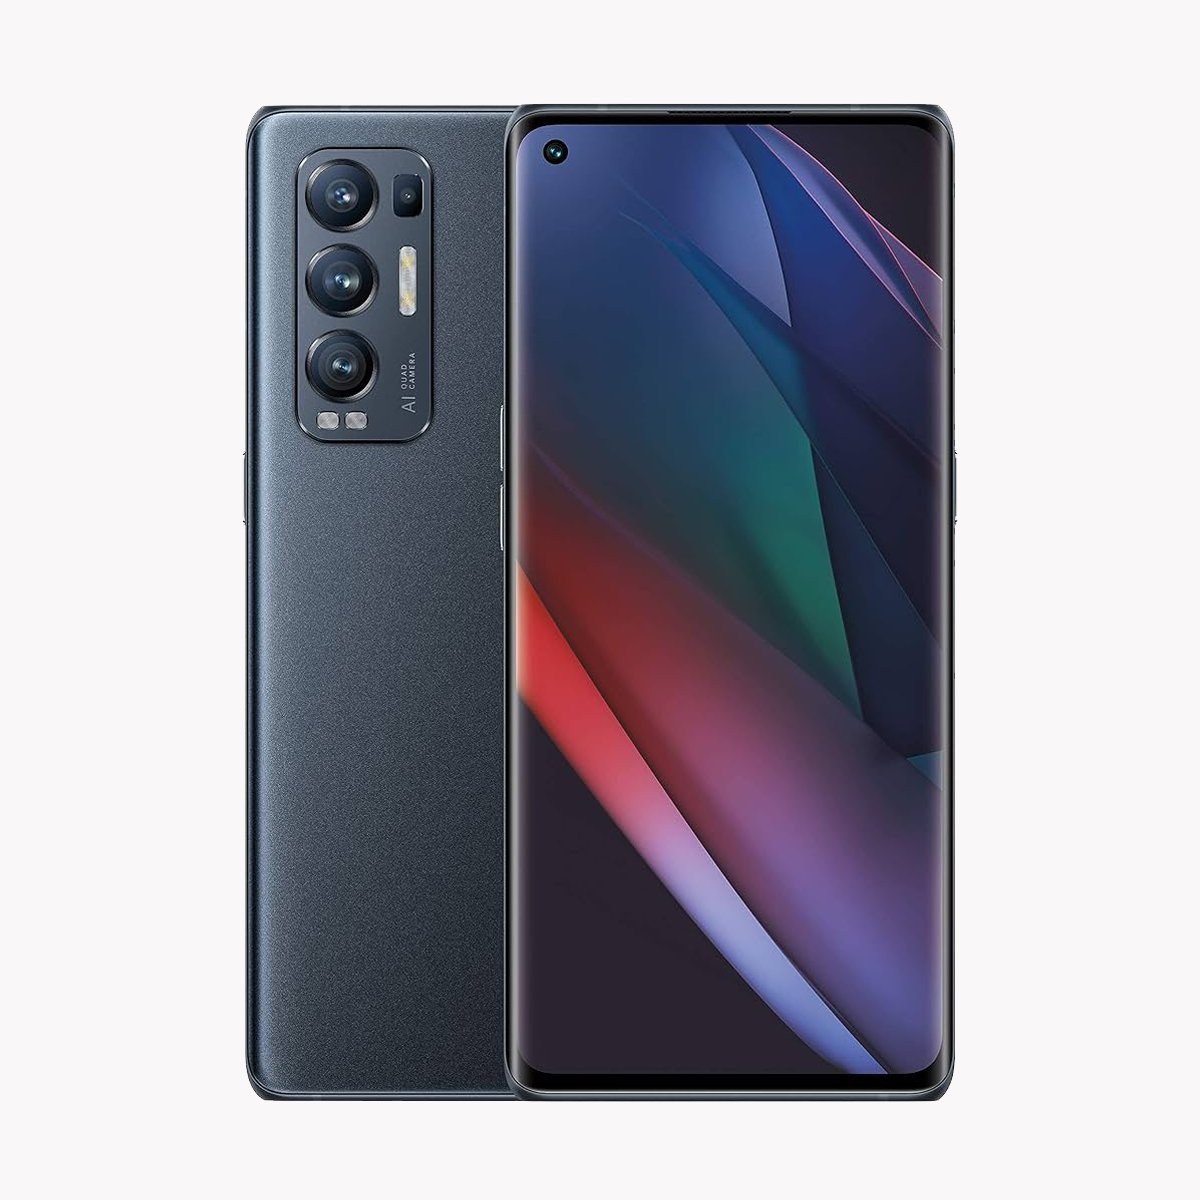 Oppo Find X3 Neo - Tech Tiger